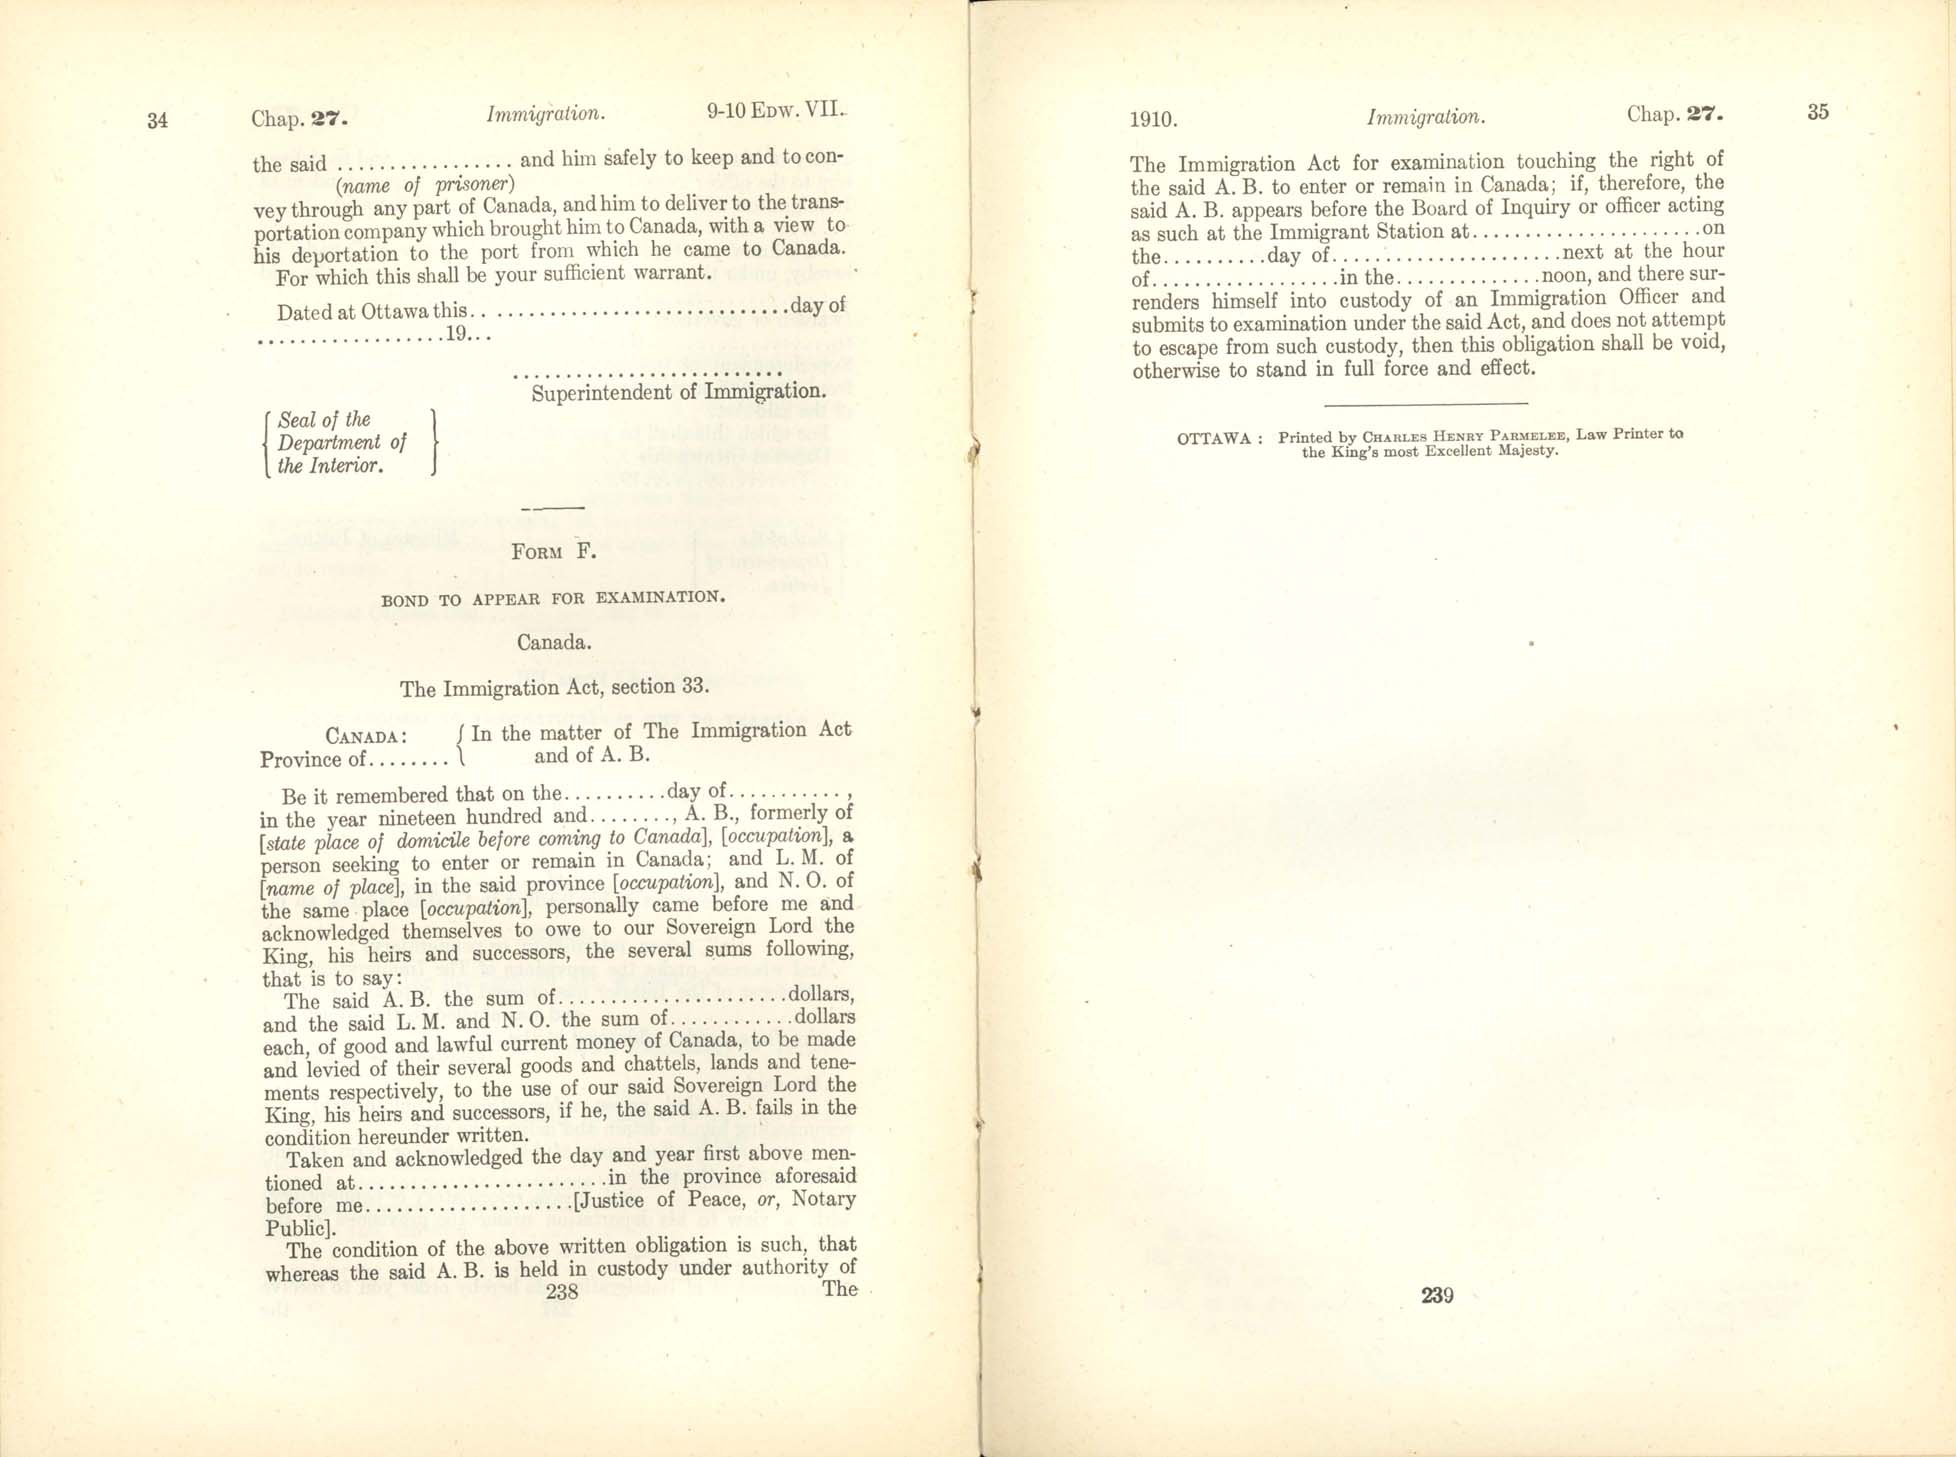 Chap. 27 Page 238, 239 Immigration Act, 1910